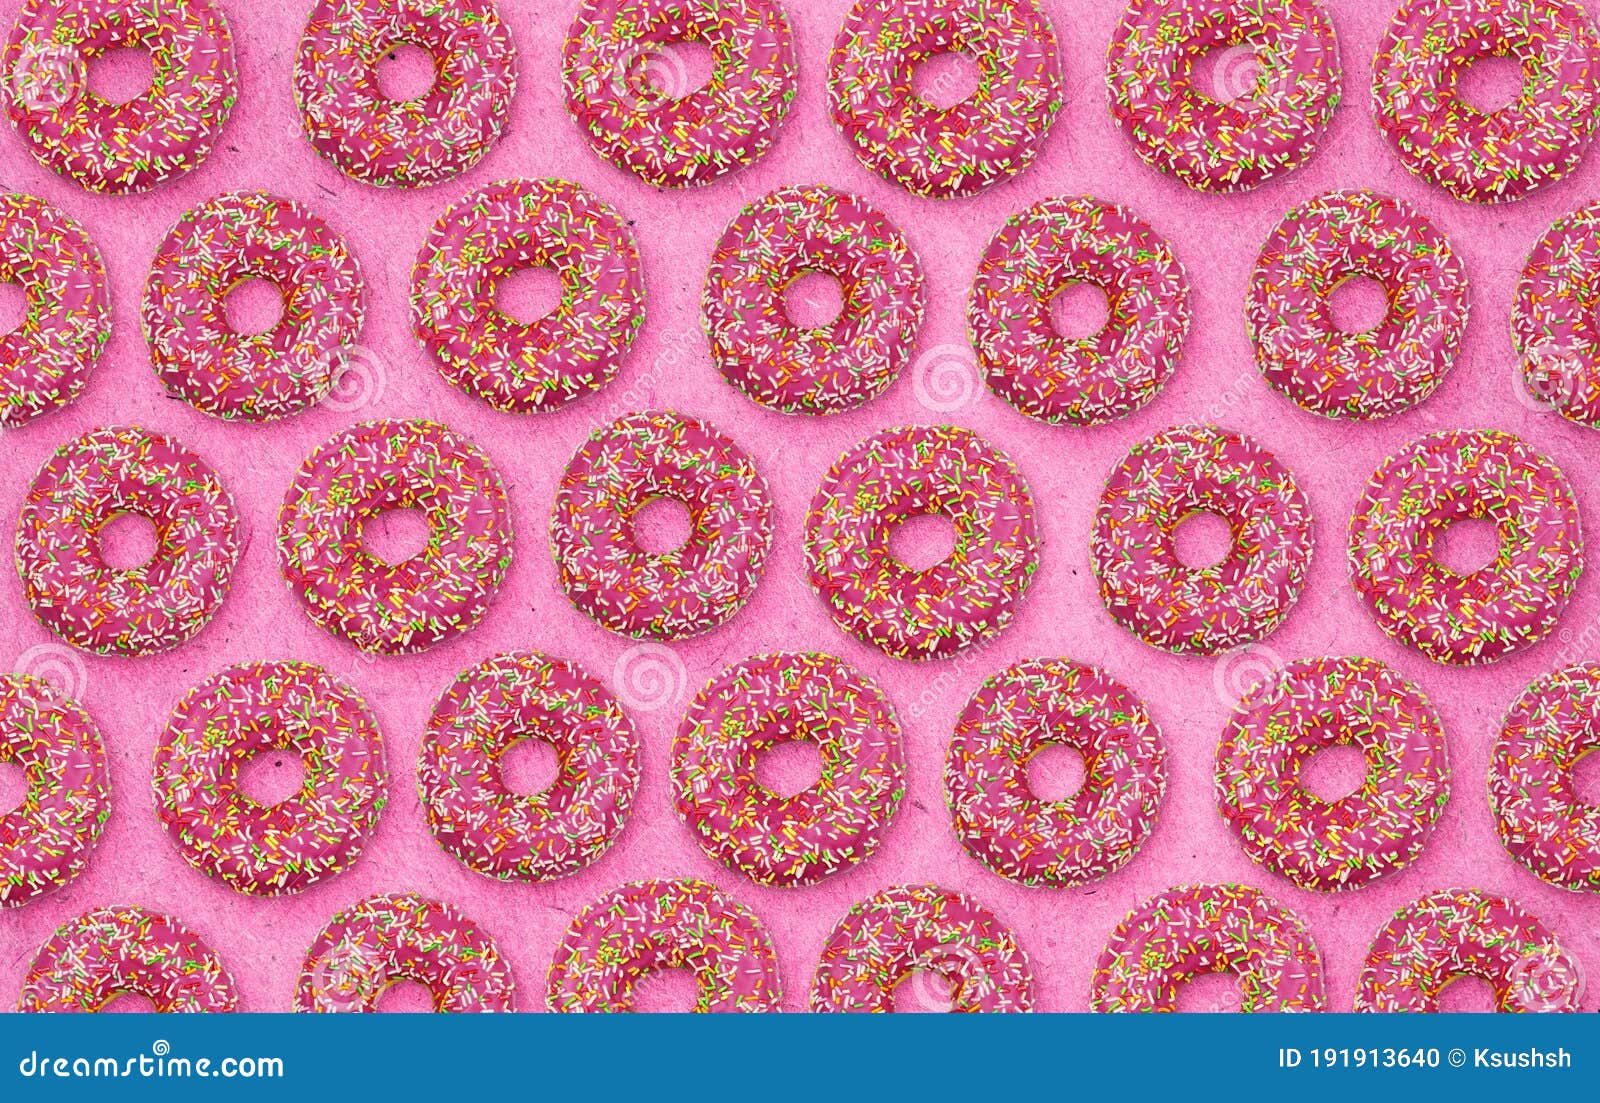 Download Sweet Donuts With Pink Glaze On Craft Paper Stock Photo - Image of hole, coated: 191913640